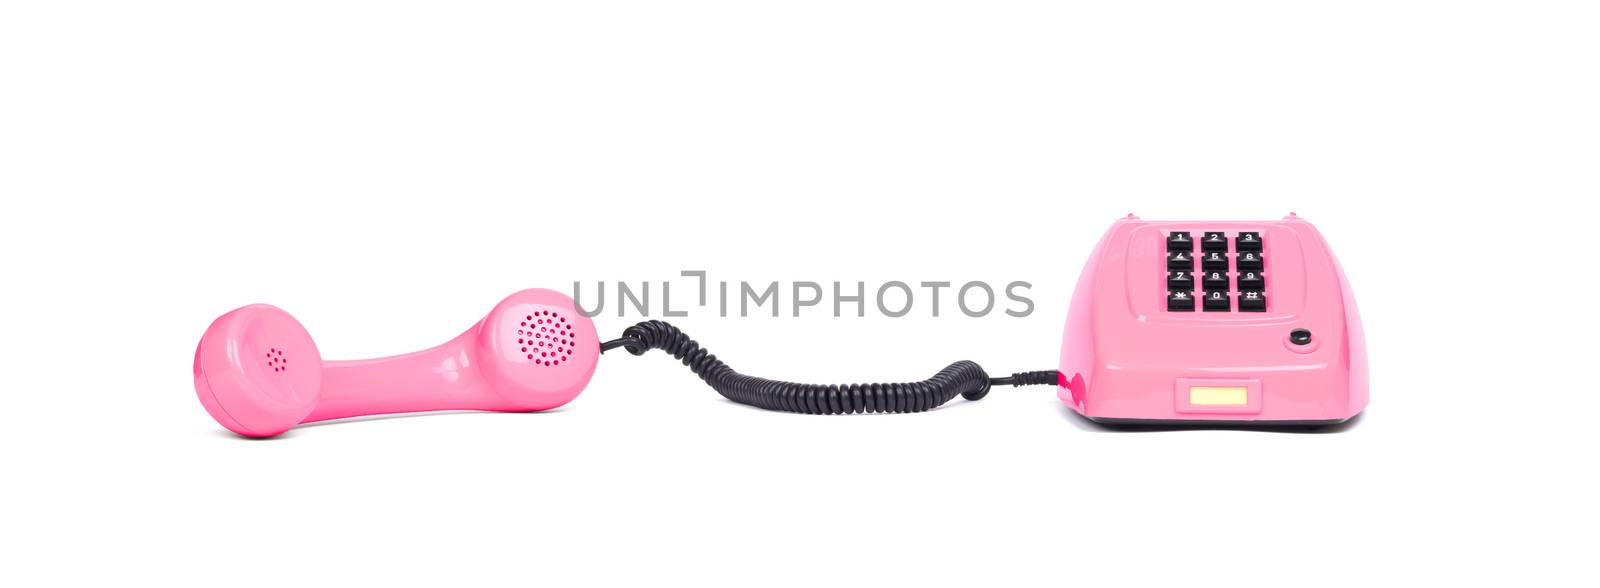 Vintage pink telephone with a white background